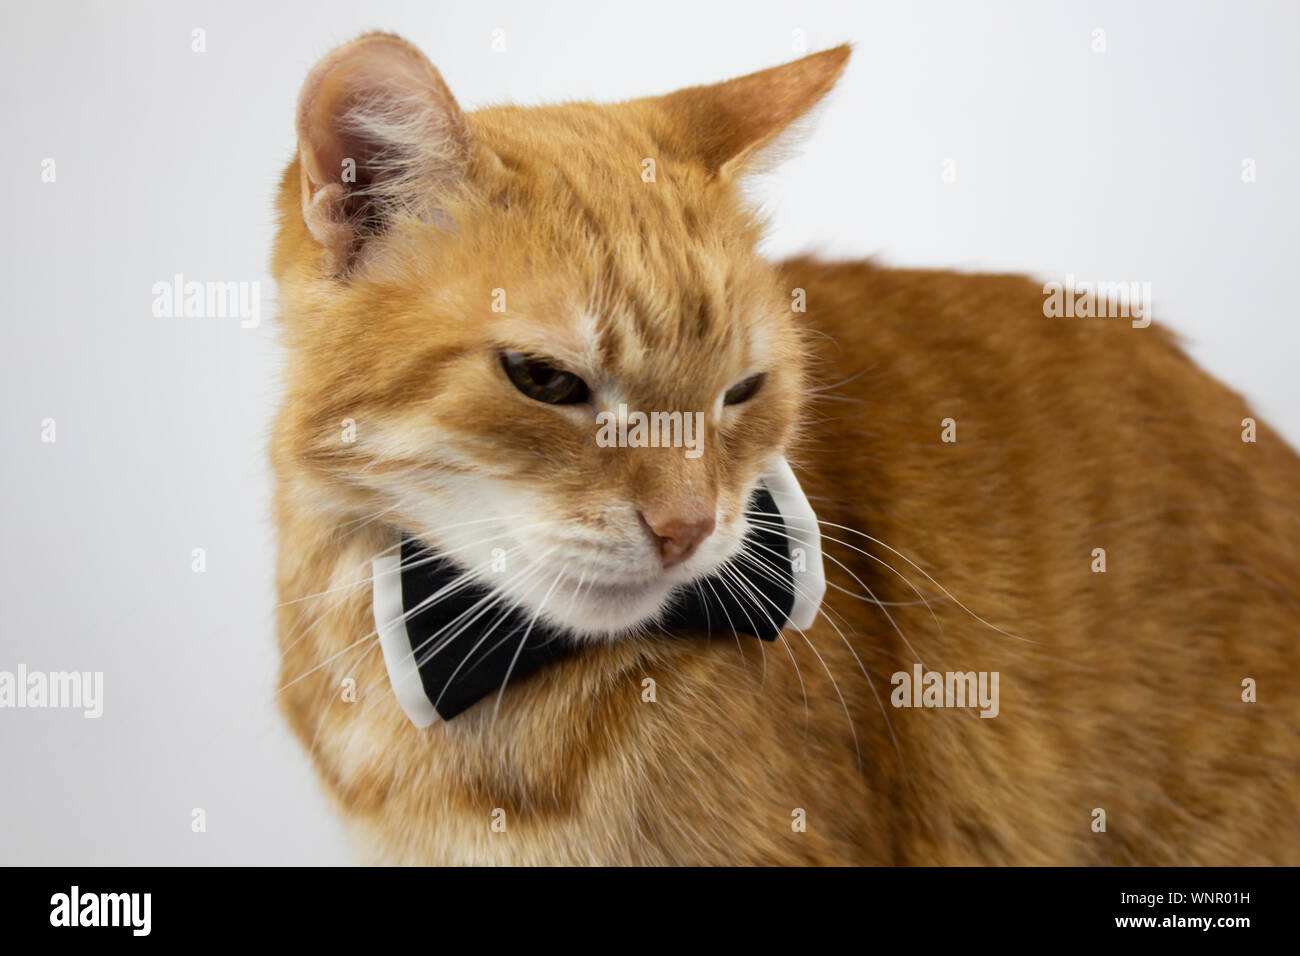 Ginger cat. Pictures of cats, cute cat, drawings of cats. Russian cat with a butterfly on a white background. Isolate. Copyspace. Stock Photo